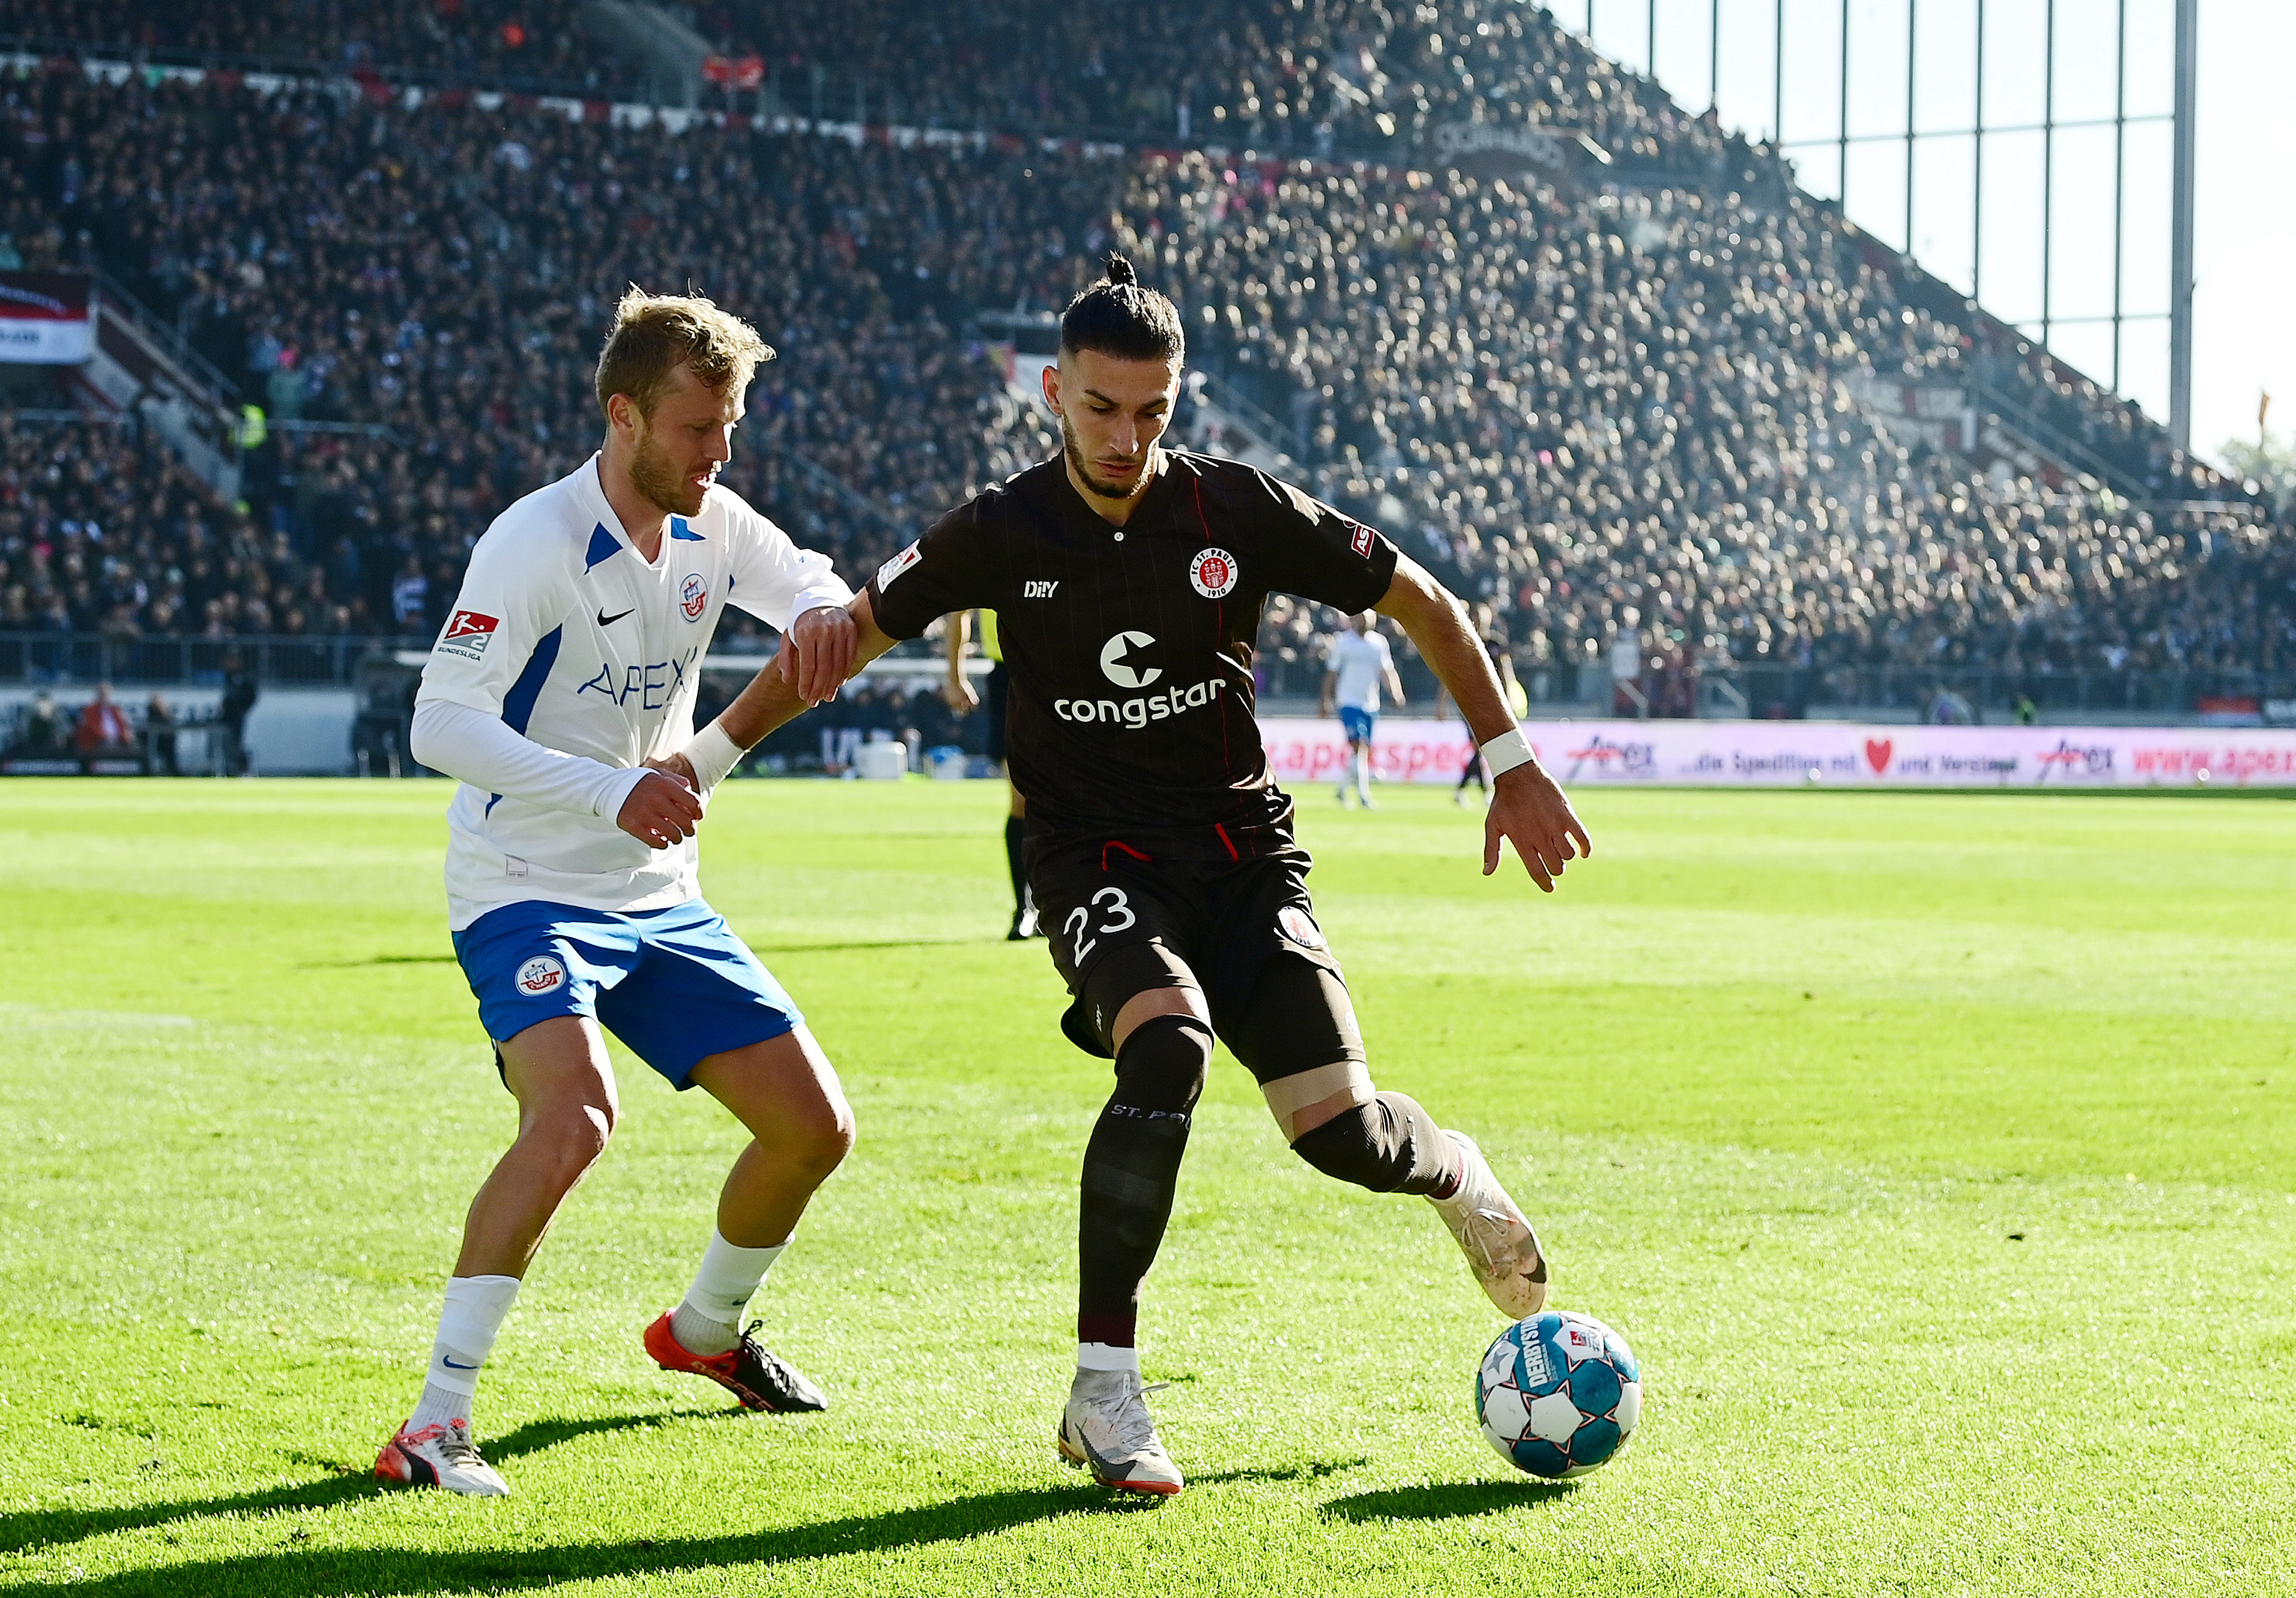 Leart Paqarada, seen here under challenge from Rostock's Nik Omladić, had by far the most touches of any St. Pauli player.